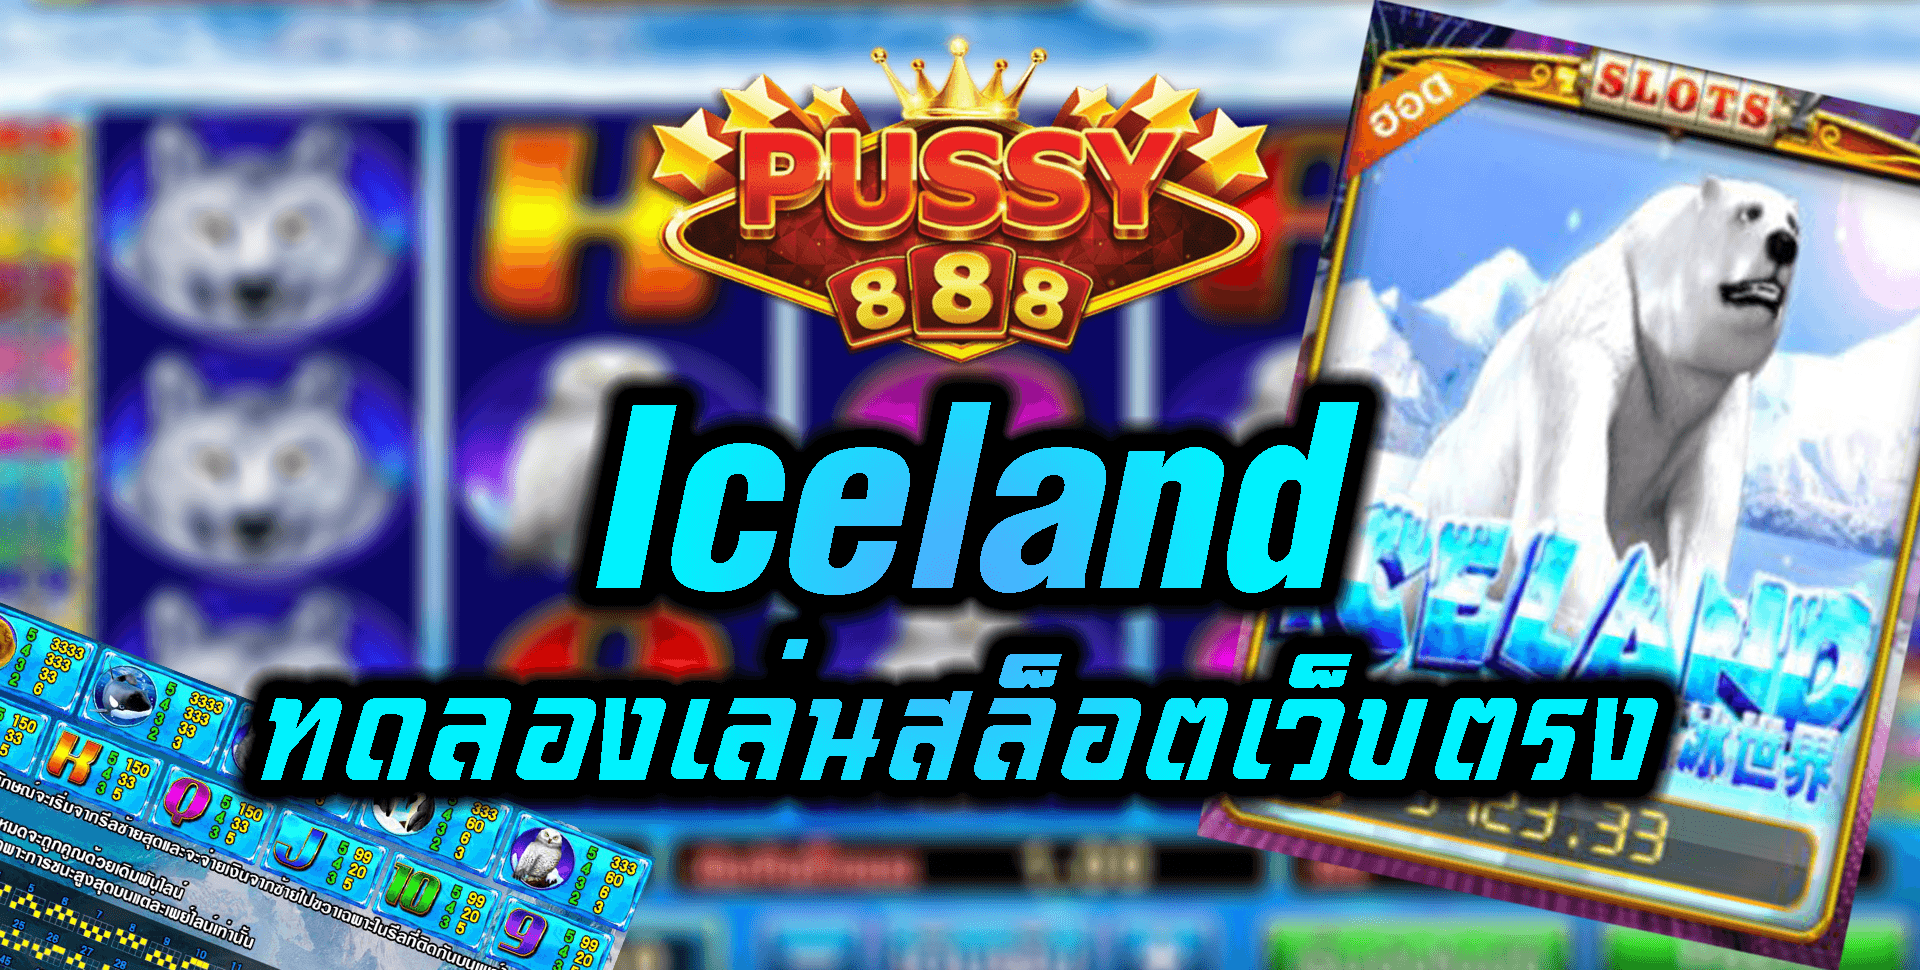 pussy888-Iceland-5